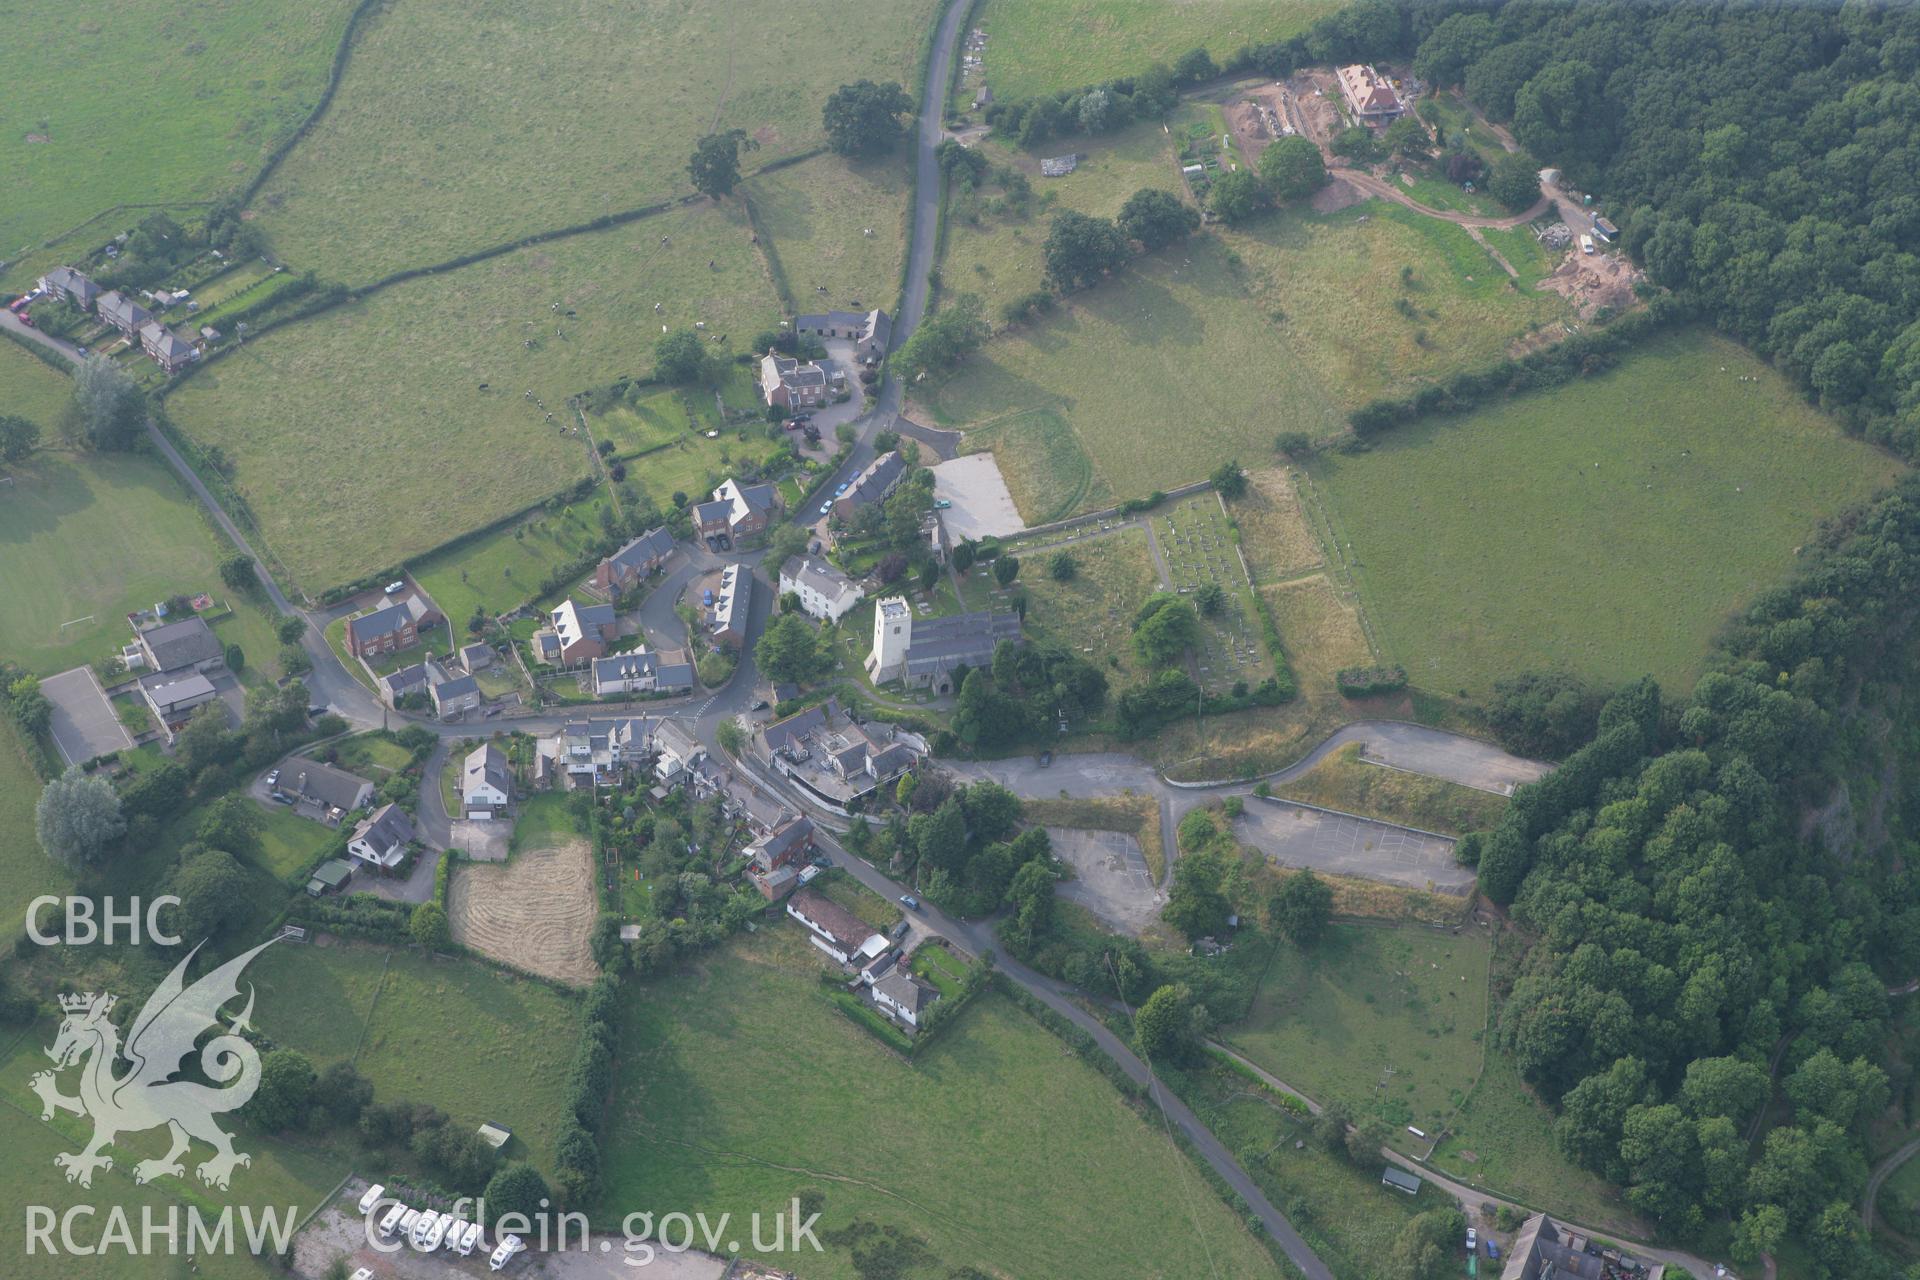 RCAHMW colour oblique photograph of Bodfari village, with St Stephen's Church. Taken by Toby Driver on 24/07/2008.